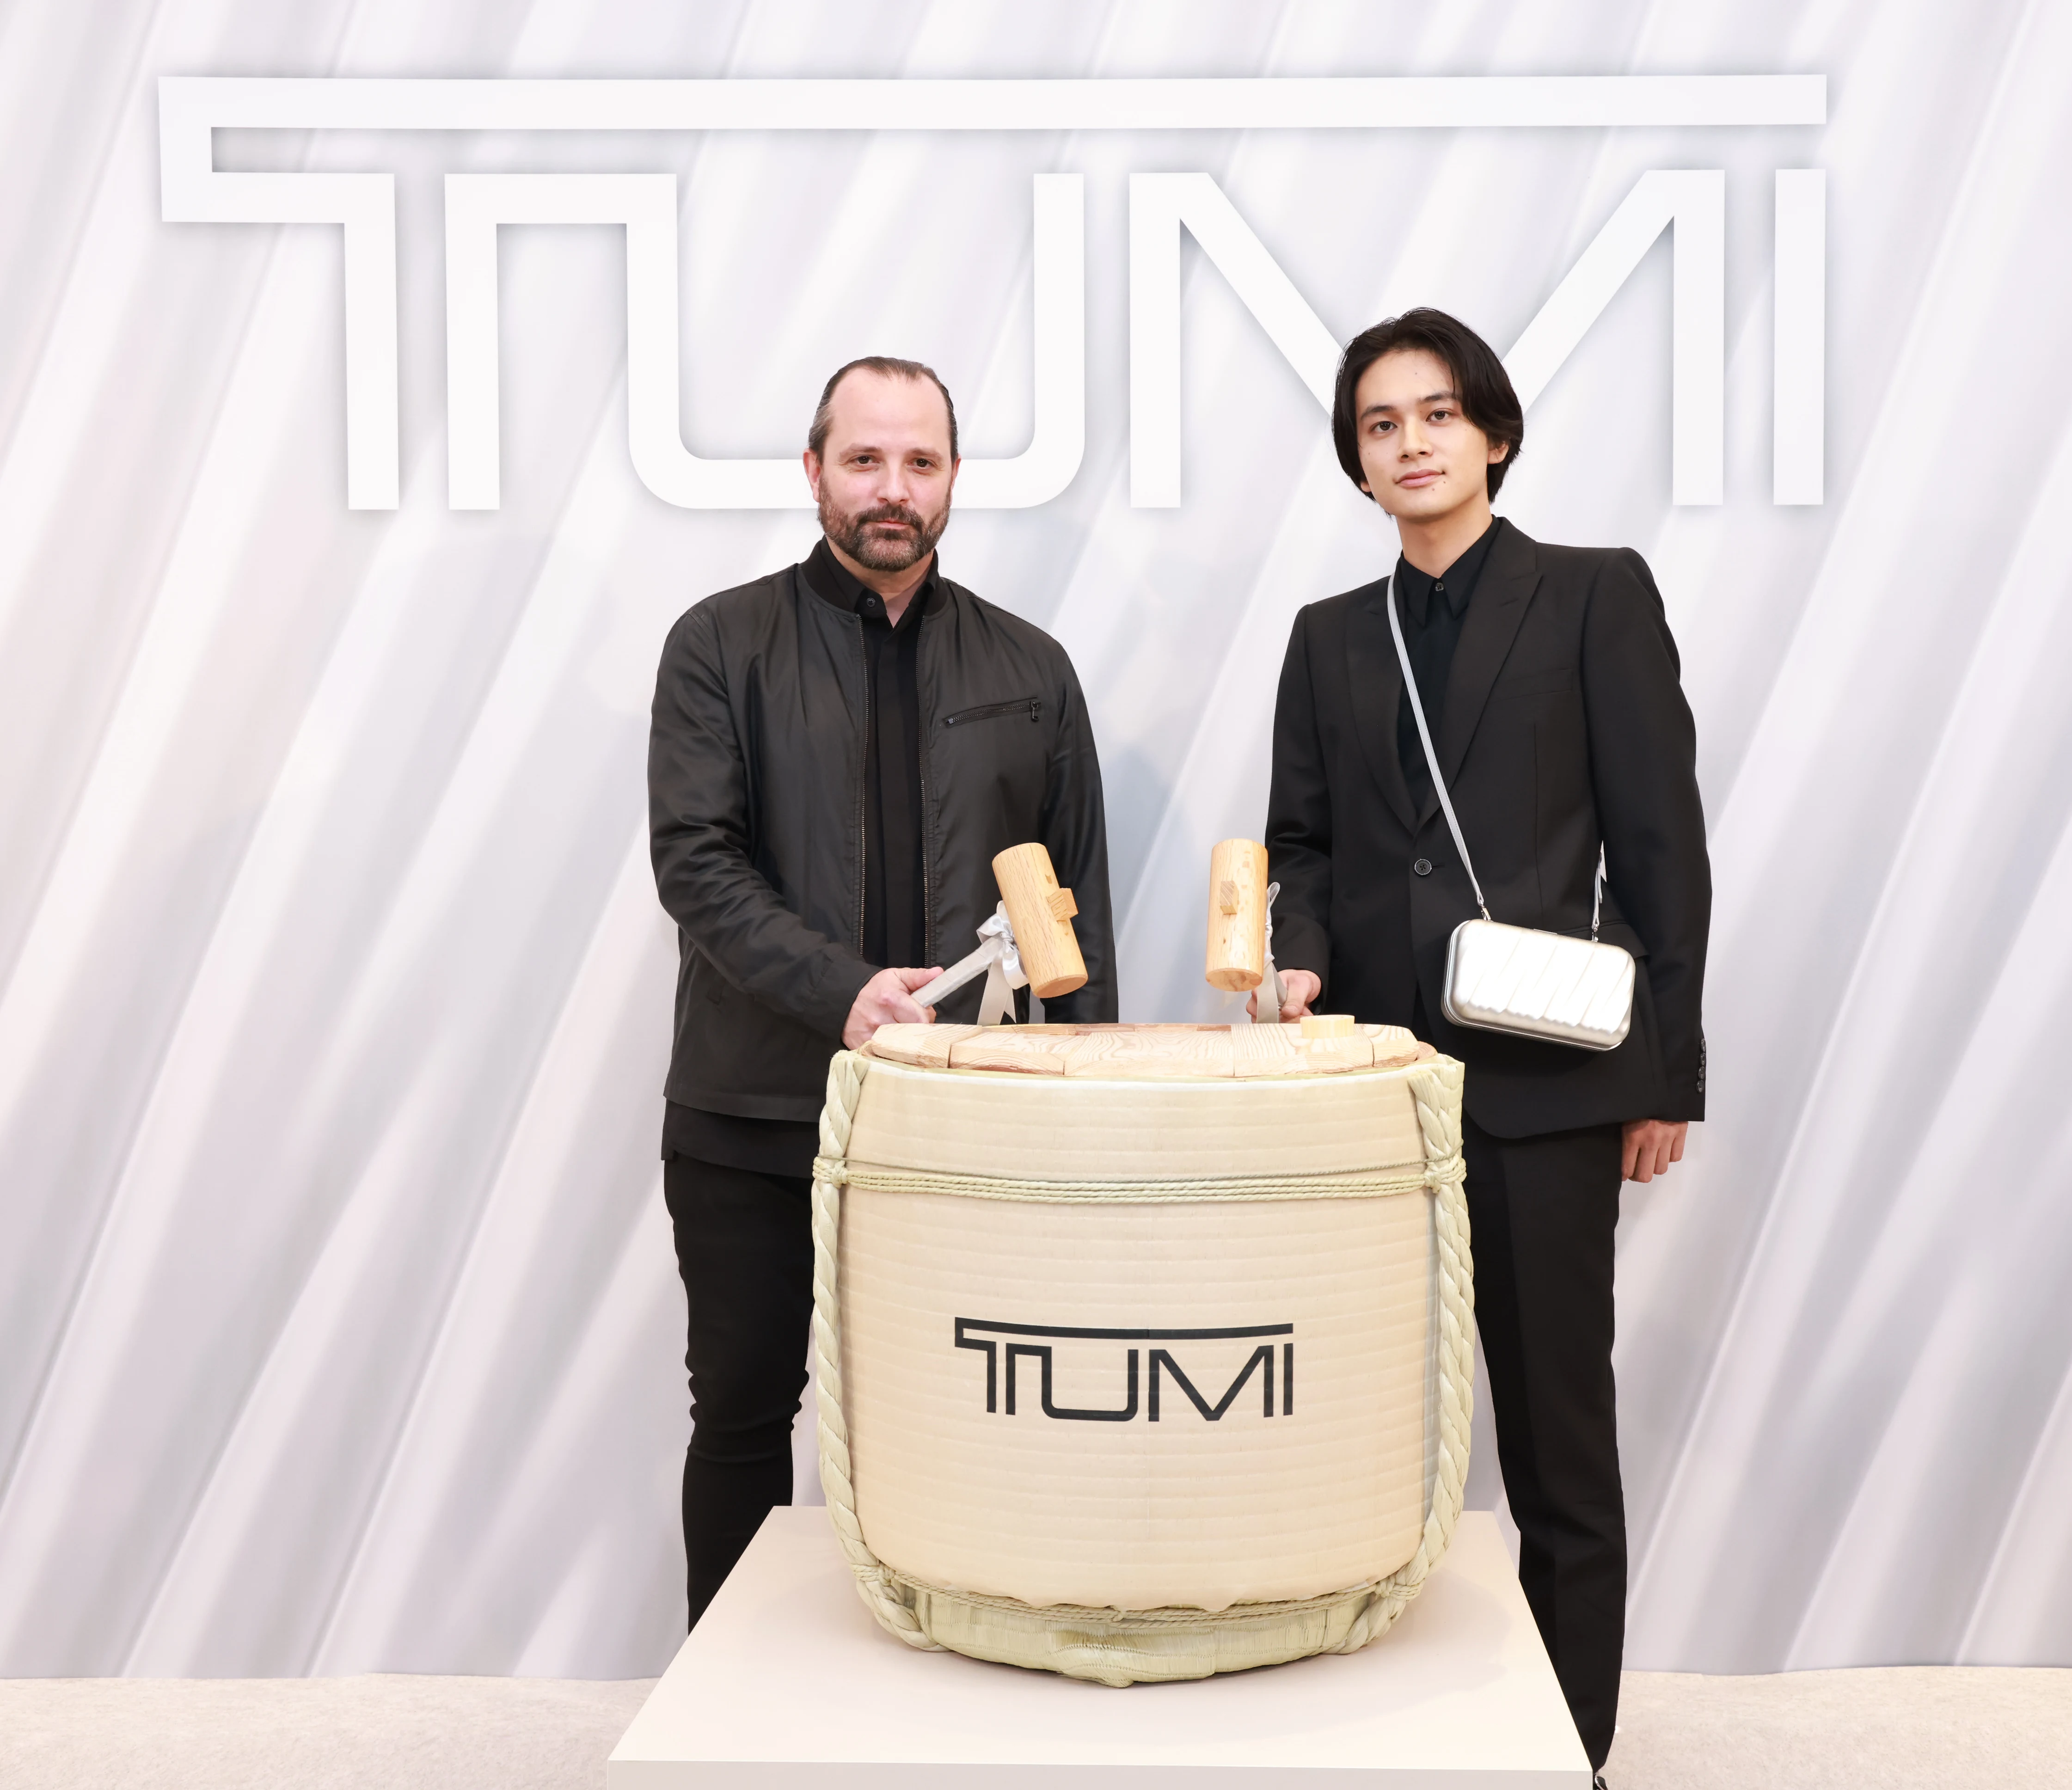 (L to R): Victor Sanz, Creative Director of TUMI and Takumi Kitamura, Japanese actor and singer, unveiled TUMI's first Asia-Pacific Flagship Store in Omotesando with a celebratory Japanese Kagami-Biraki ceremony.